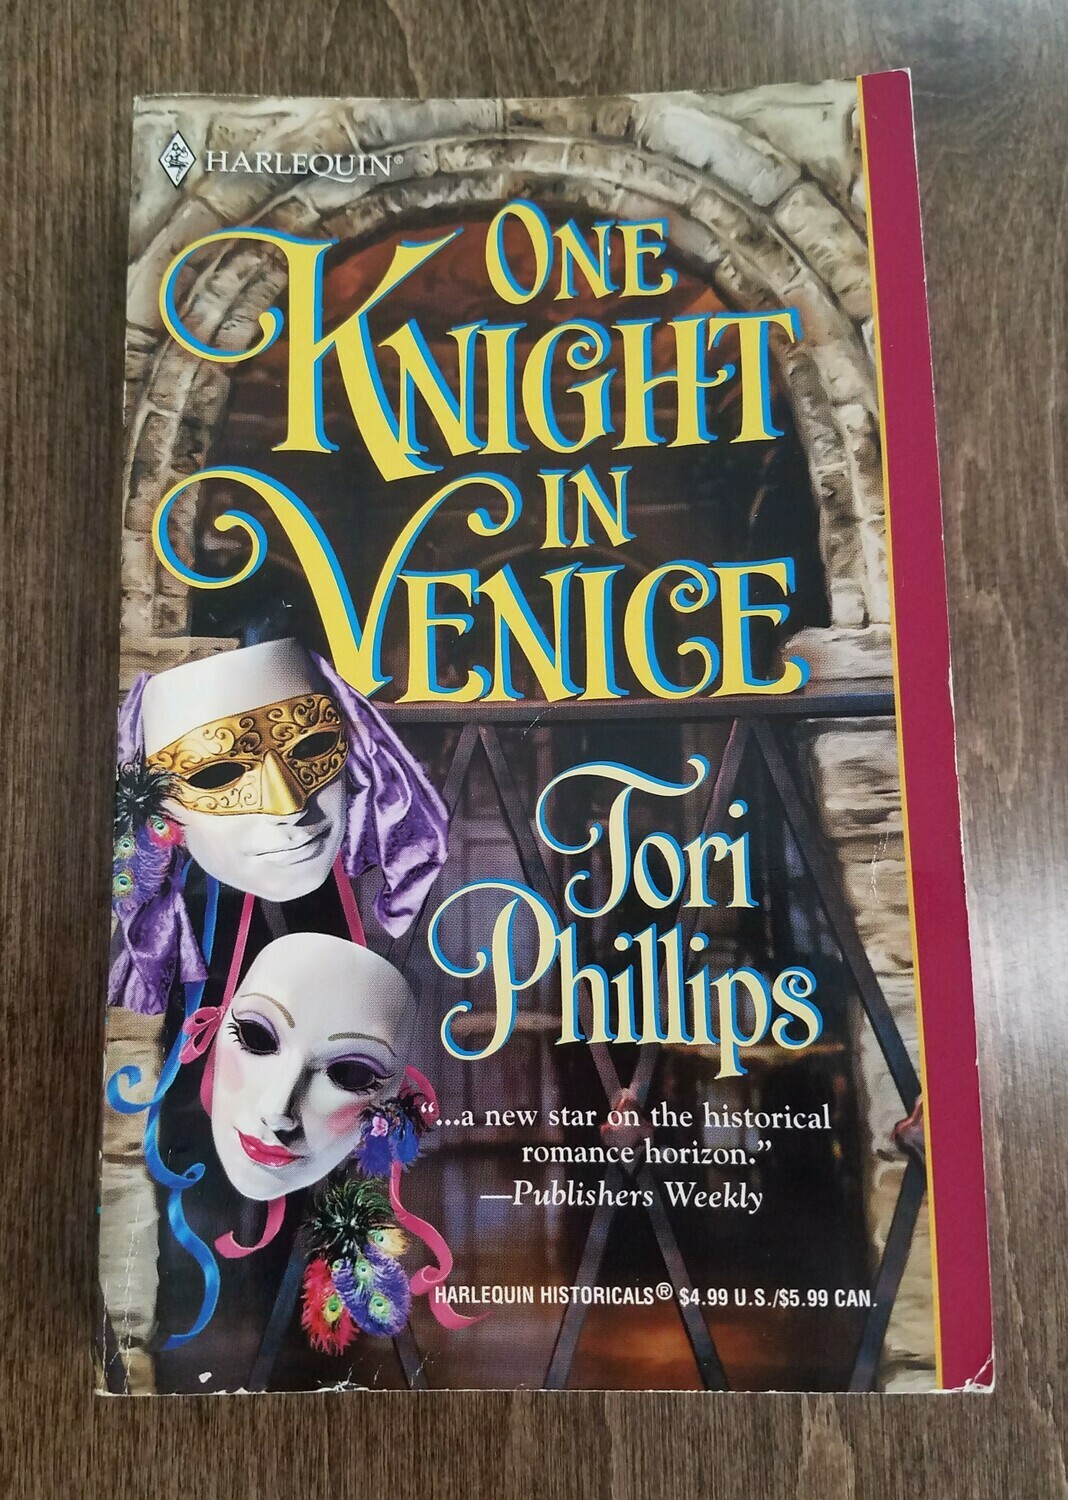 One Knight in Venice by Tori Phillips